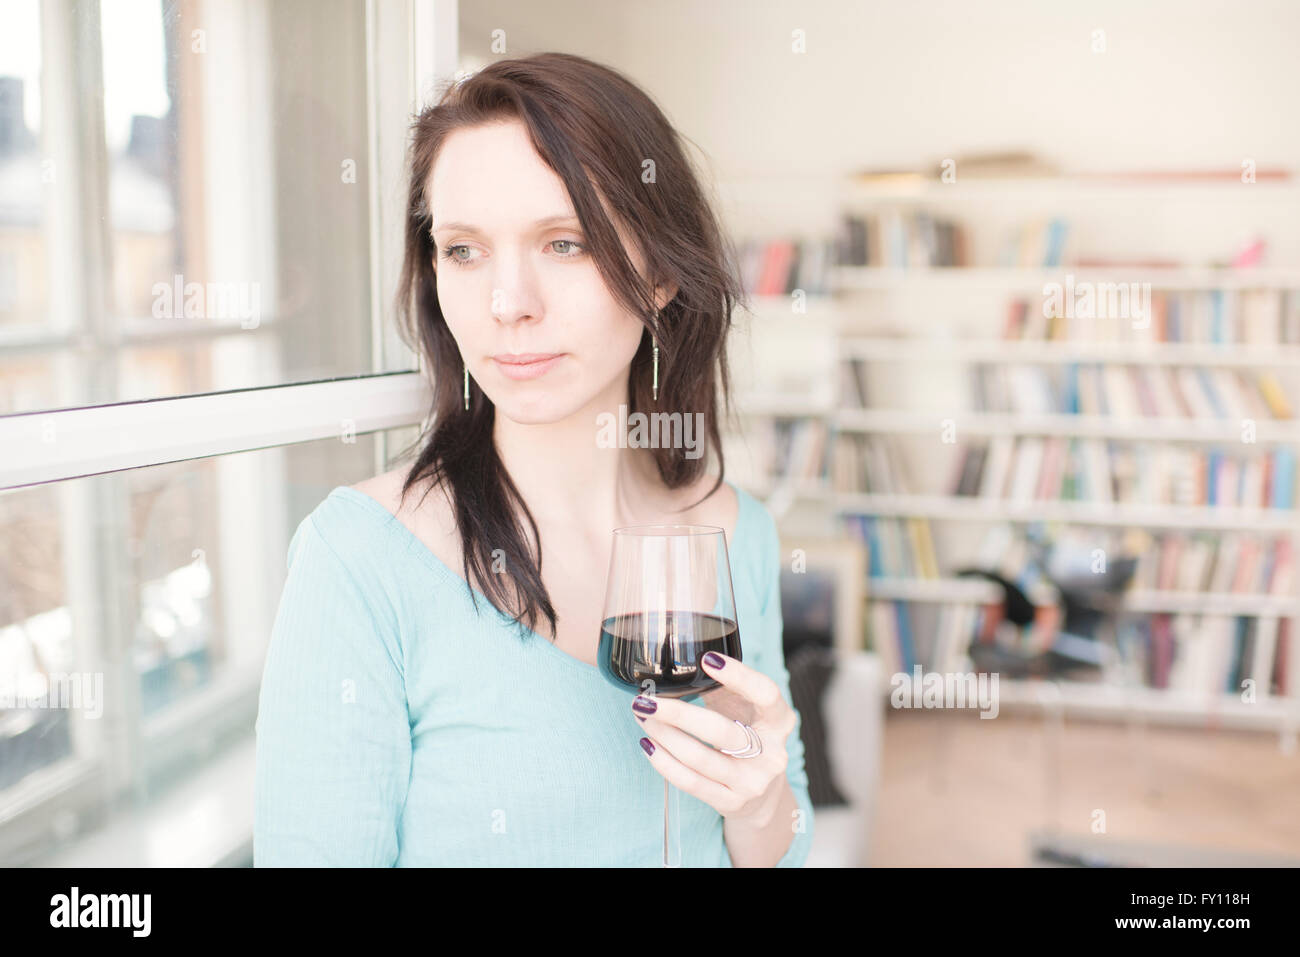 Woman holding glass of red wine in home interior Concept of sadness waiting and anticipation Lifestyle image of contemplation. Stock Photo